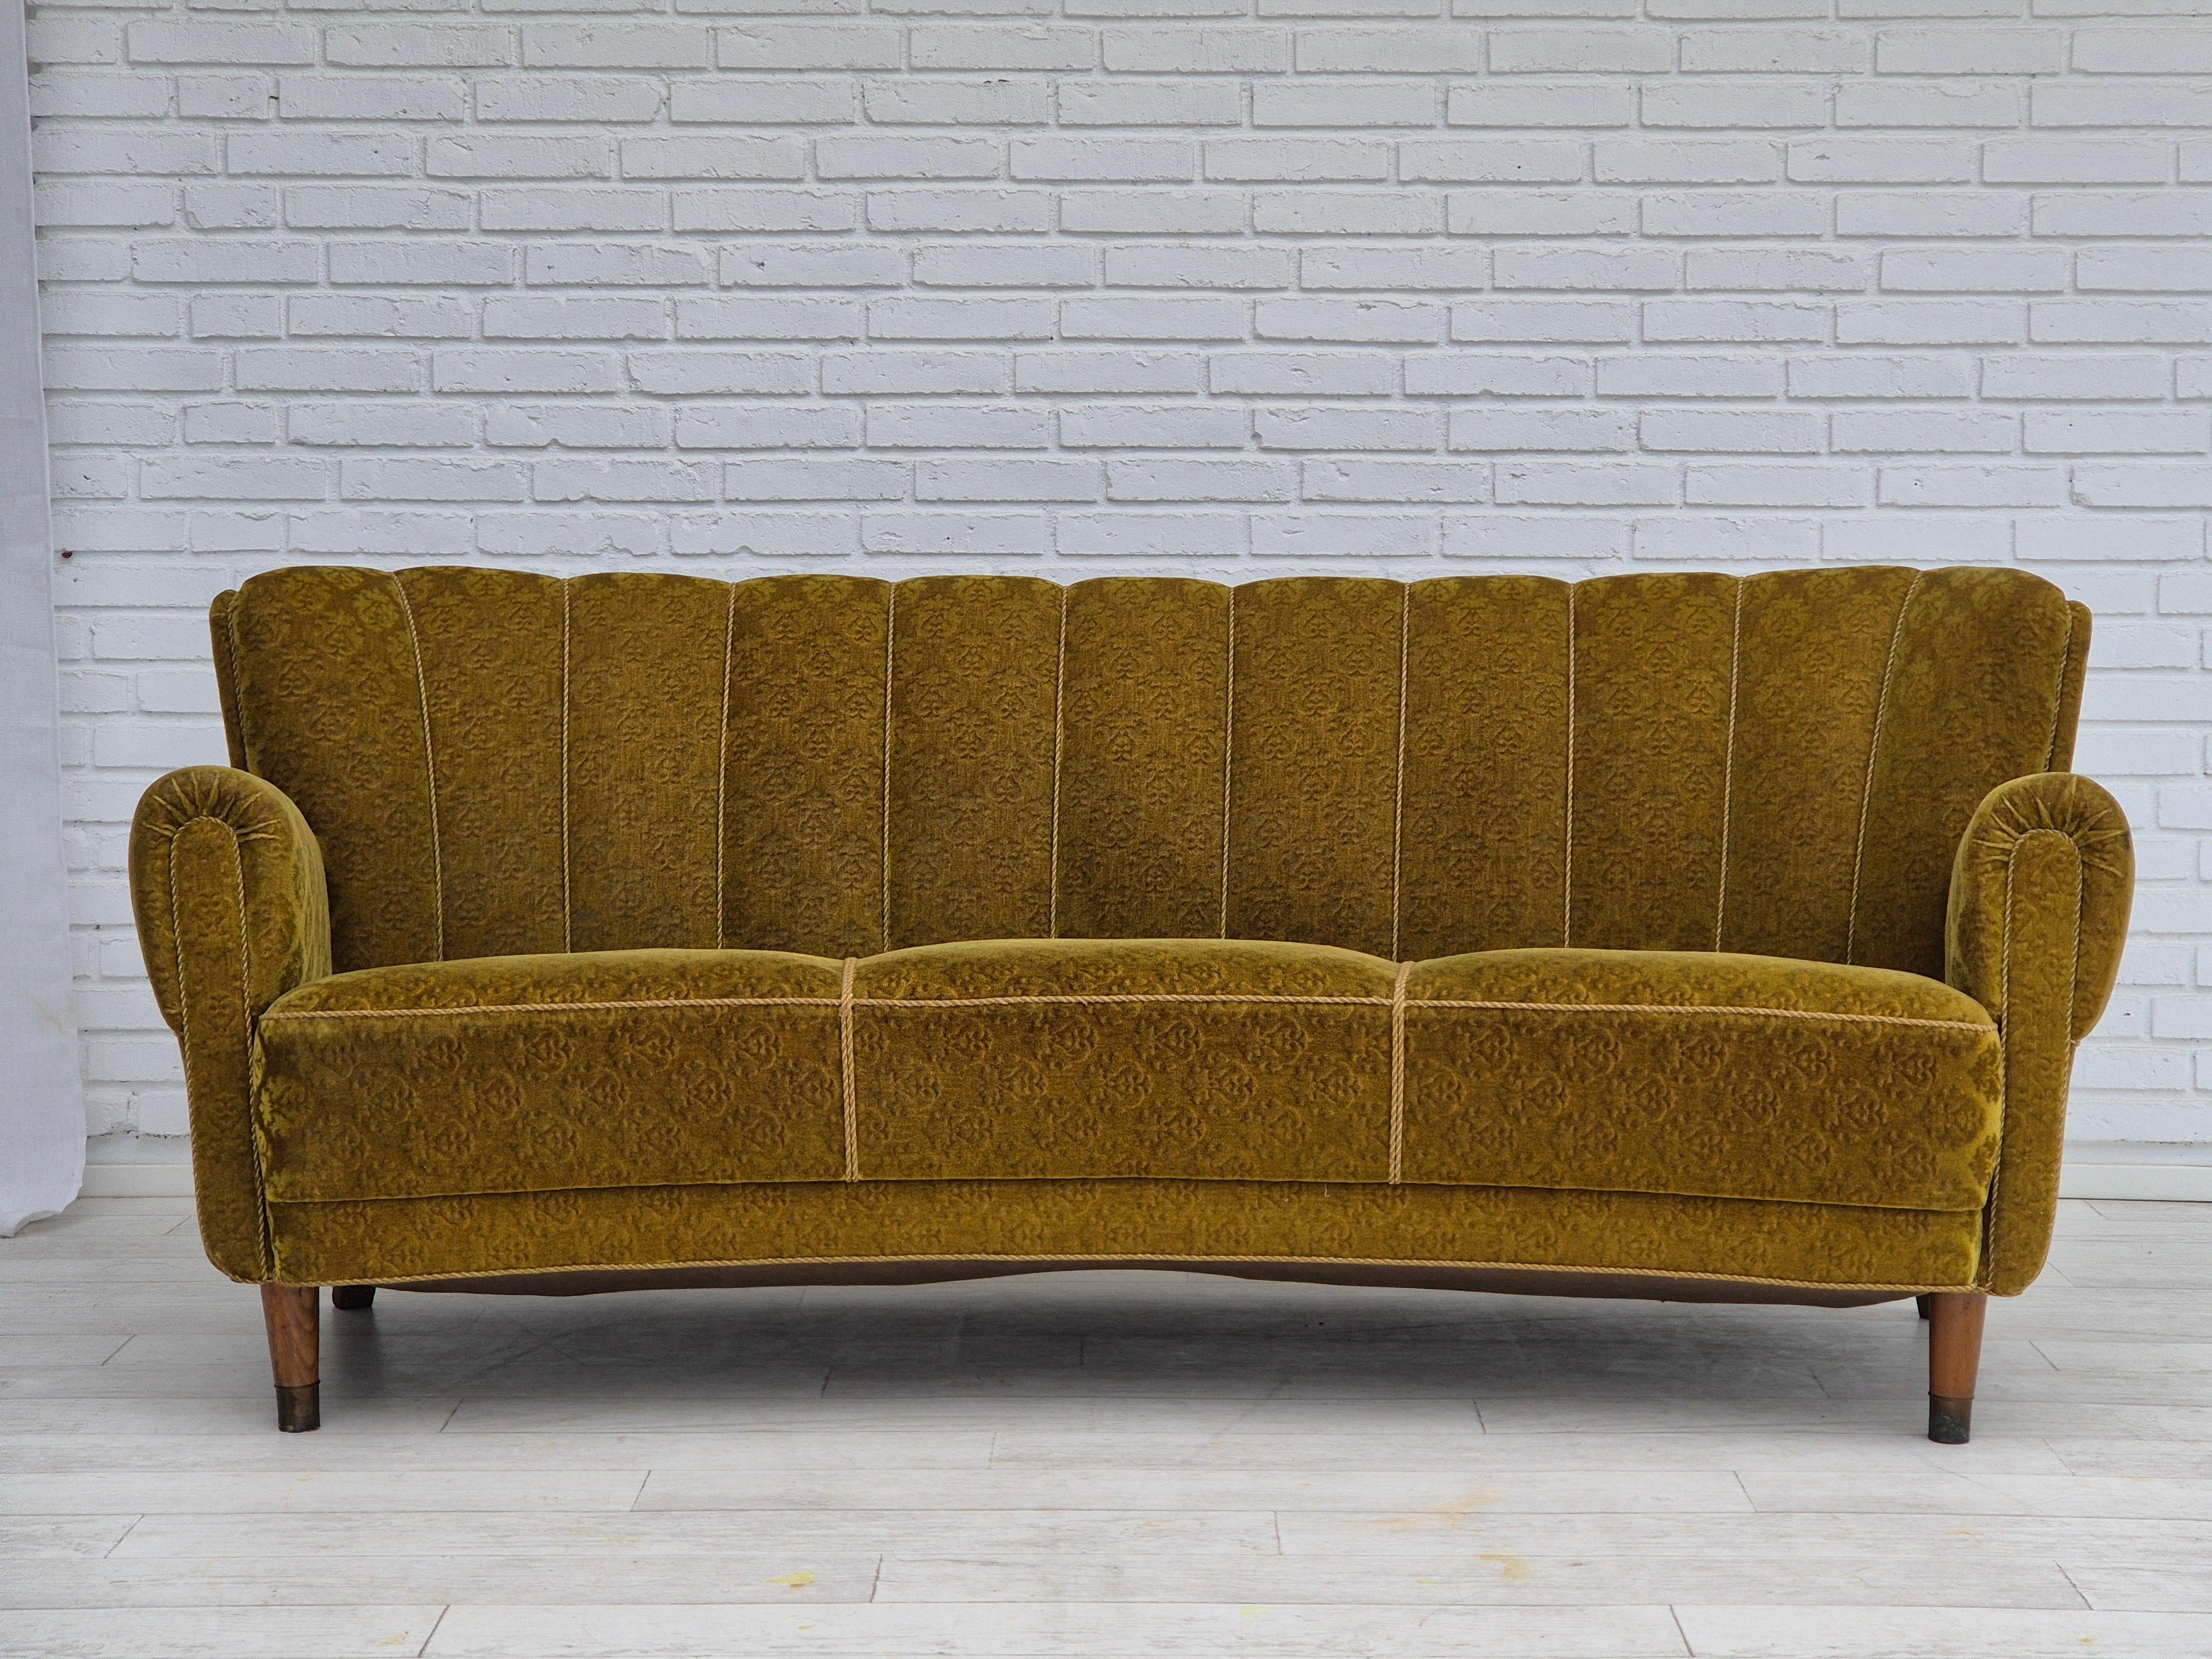 1960s, Danish 3 seater curved sofa in original very good condition: no smells and no stains. Original green furniture velour, beech wood legs with brass plugs. Brass springs in the seat. Manufactured by Danish furniture manufacturer in about